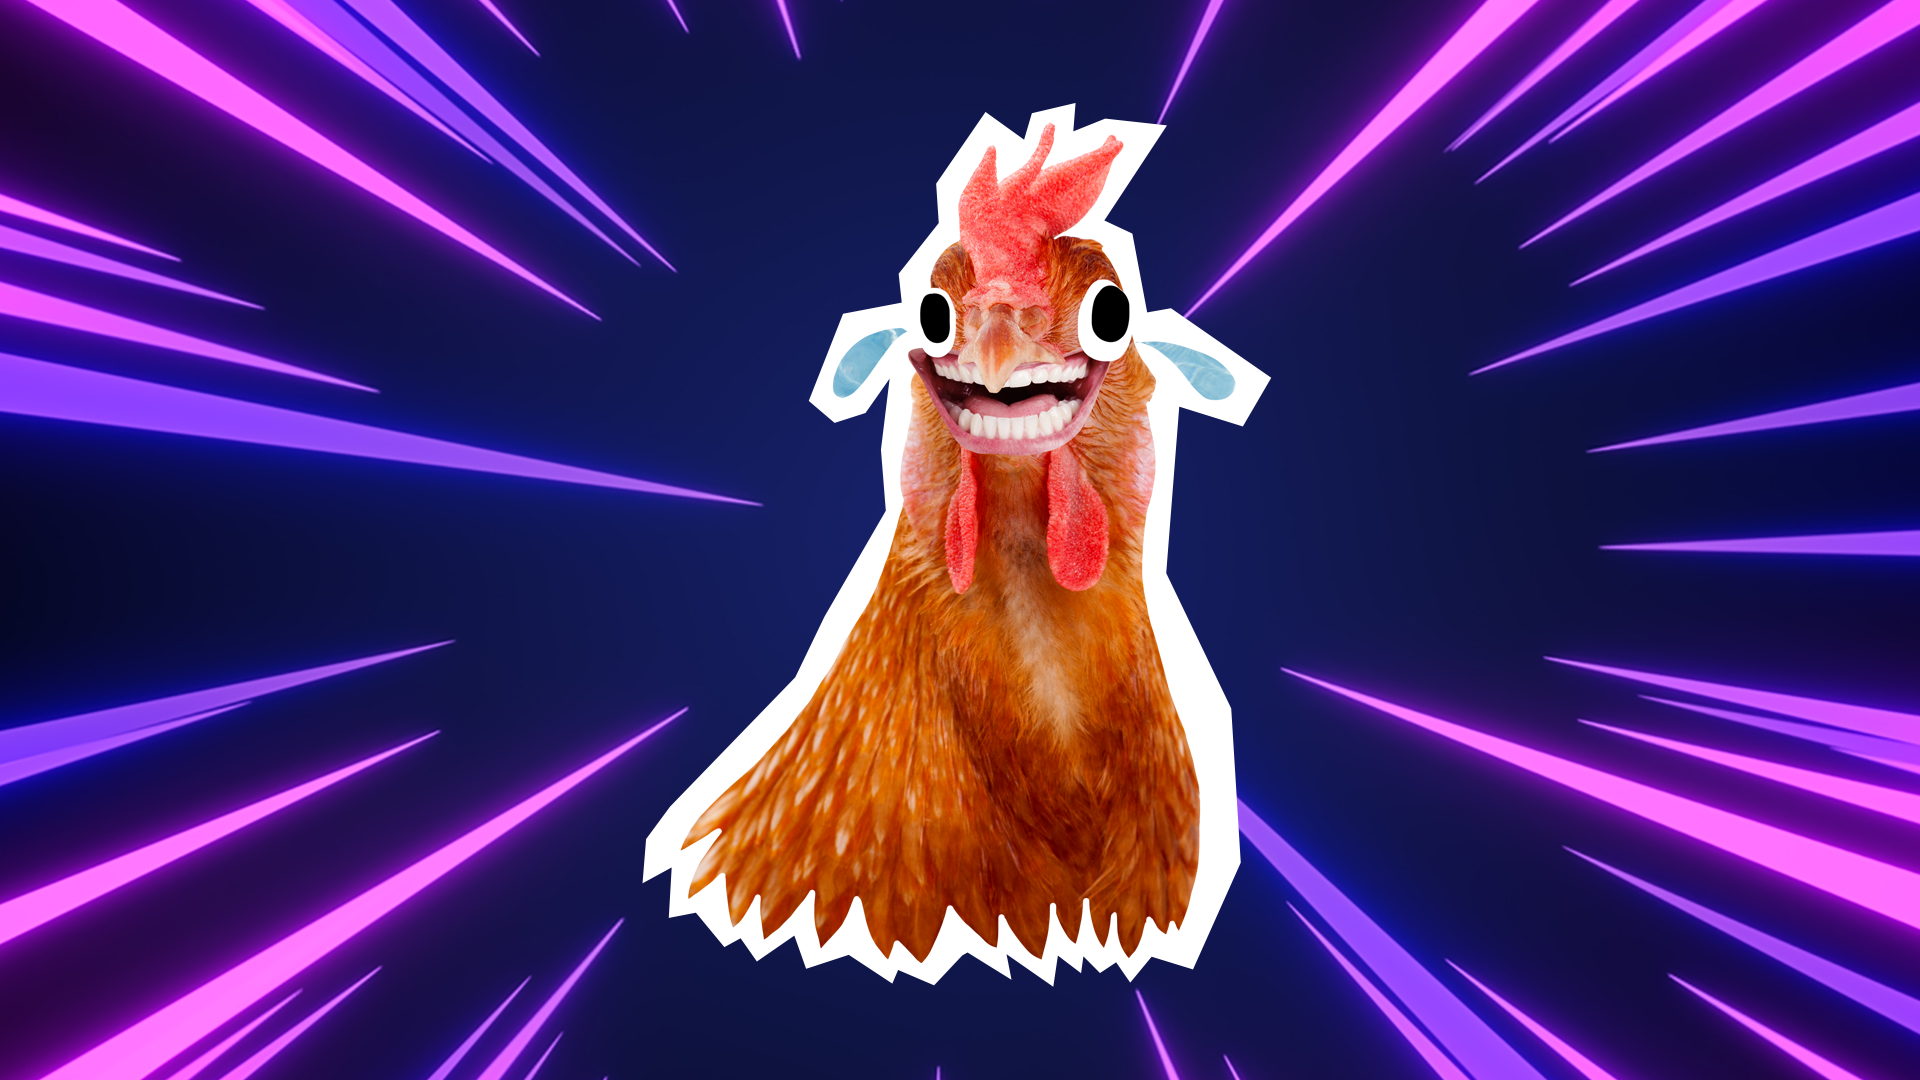 Chicken laughing